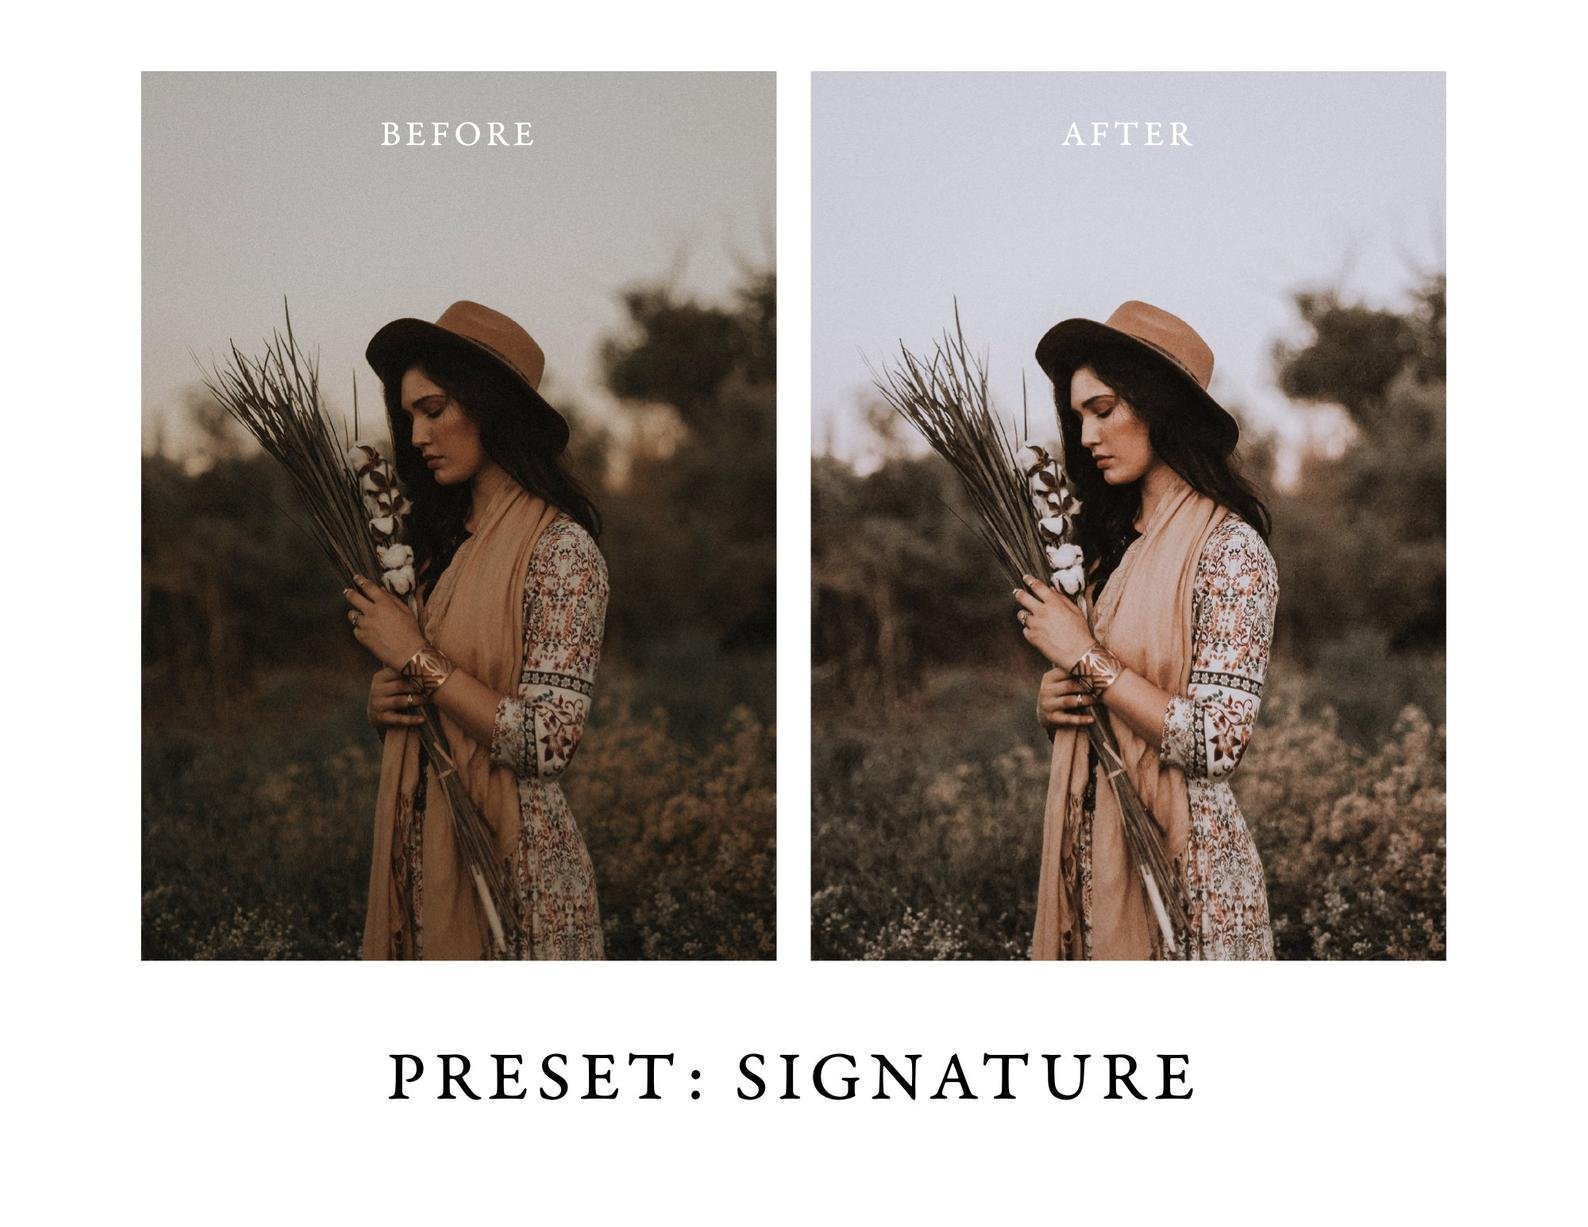 Vibrant + Moody Lightroom Presets Ipreview image.